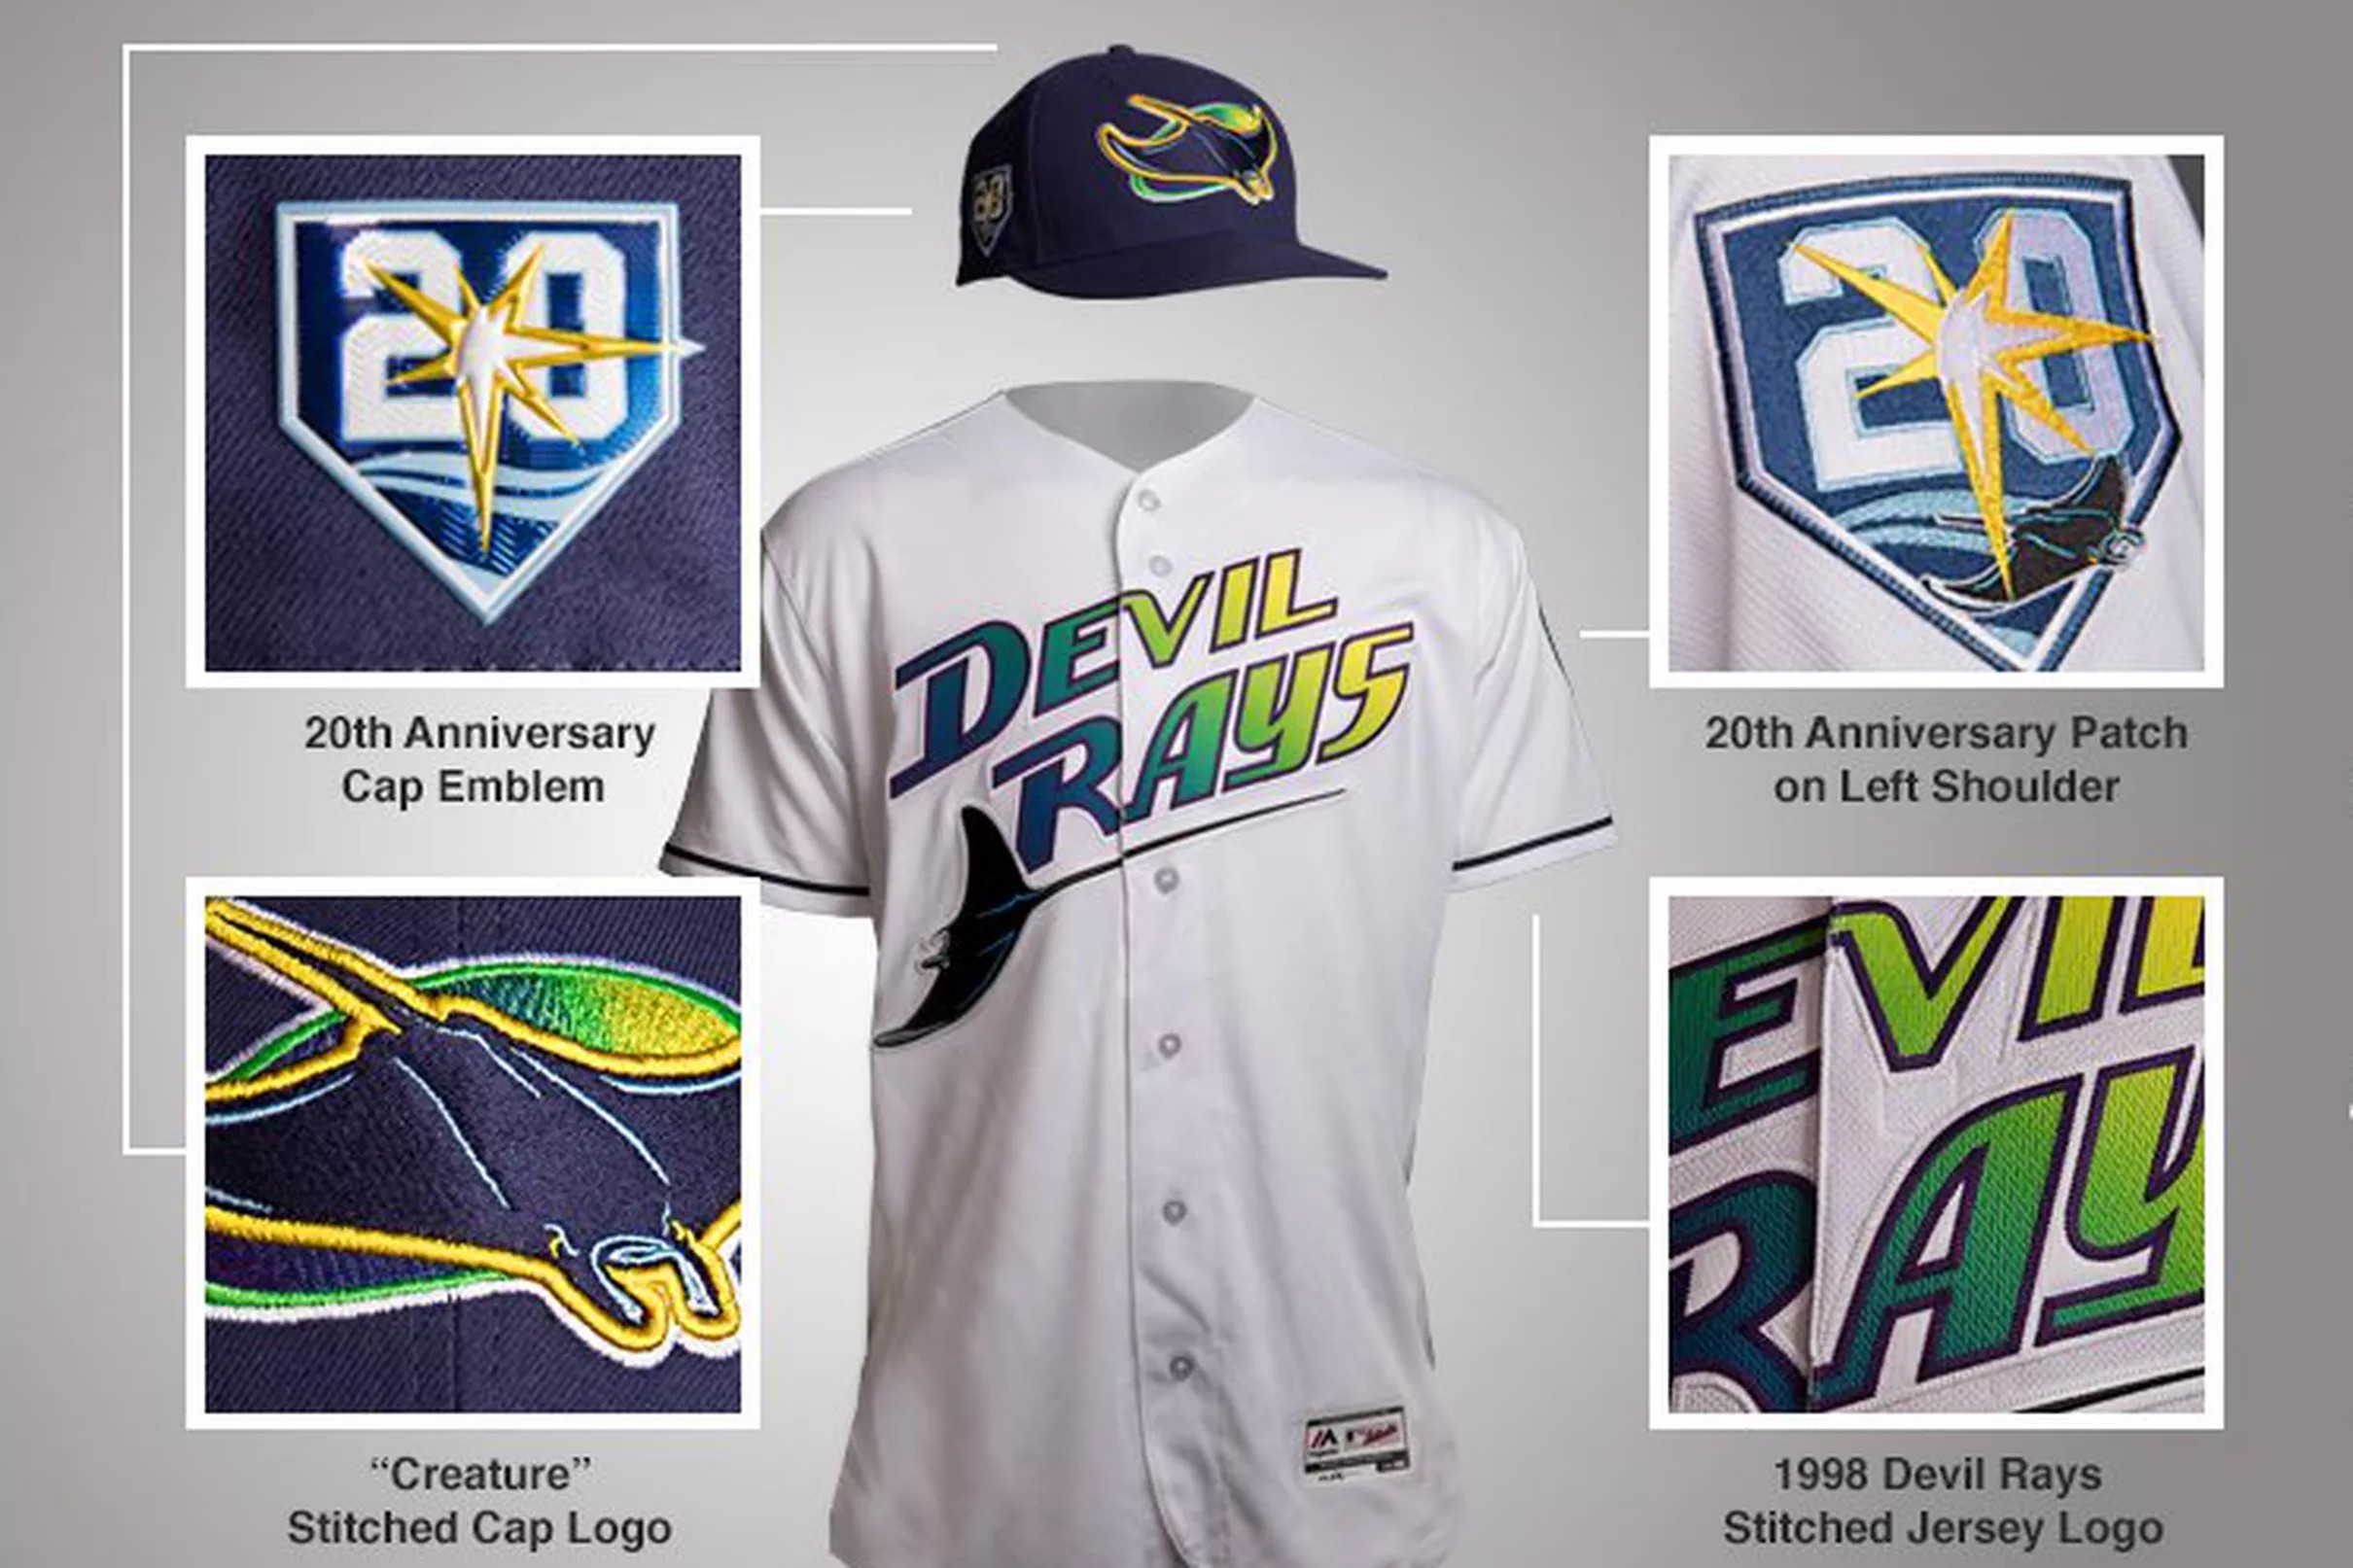 Tampa Bay Rays to bring back Devil Rays jersey in 2018